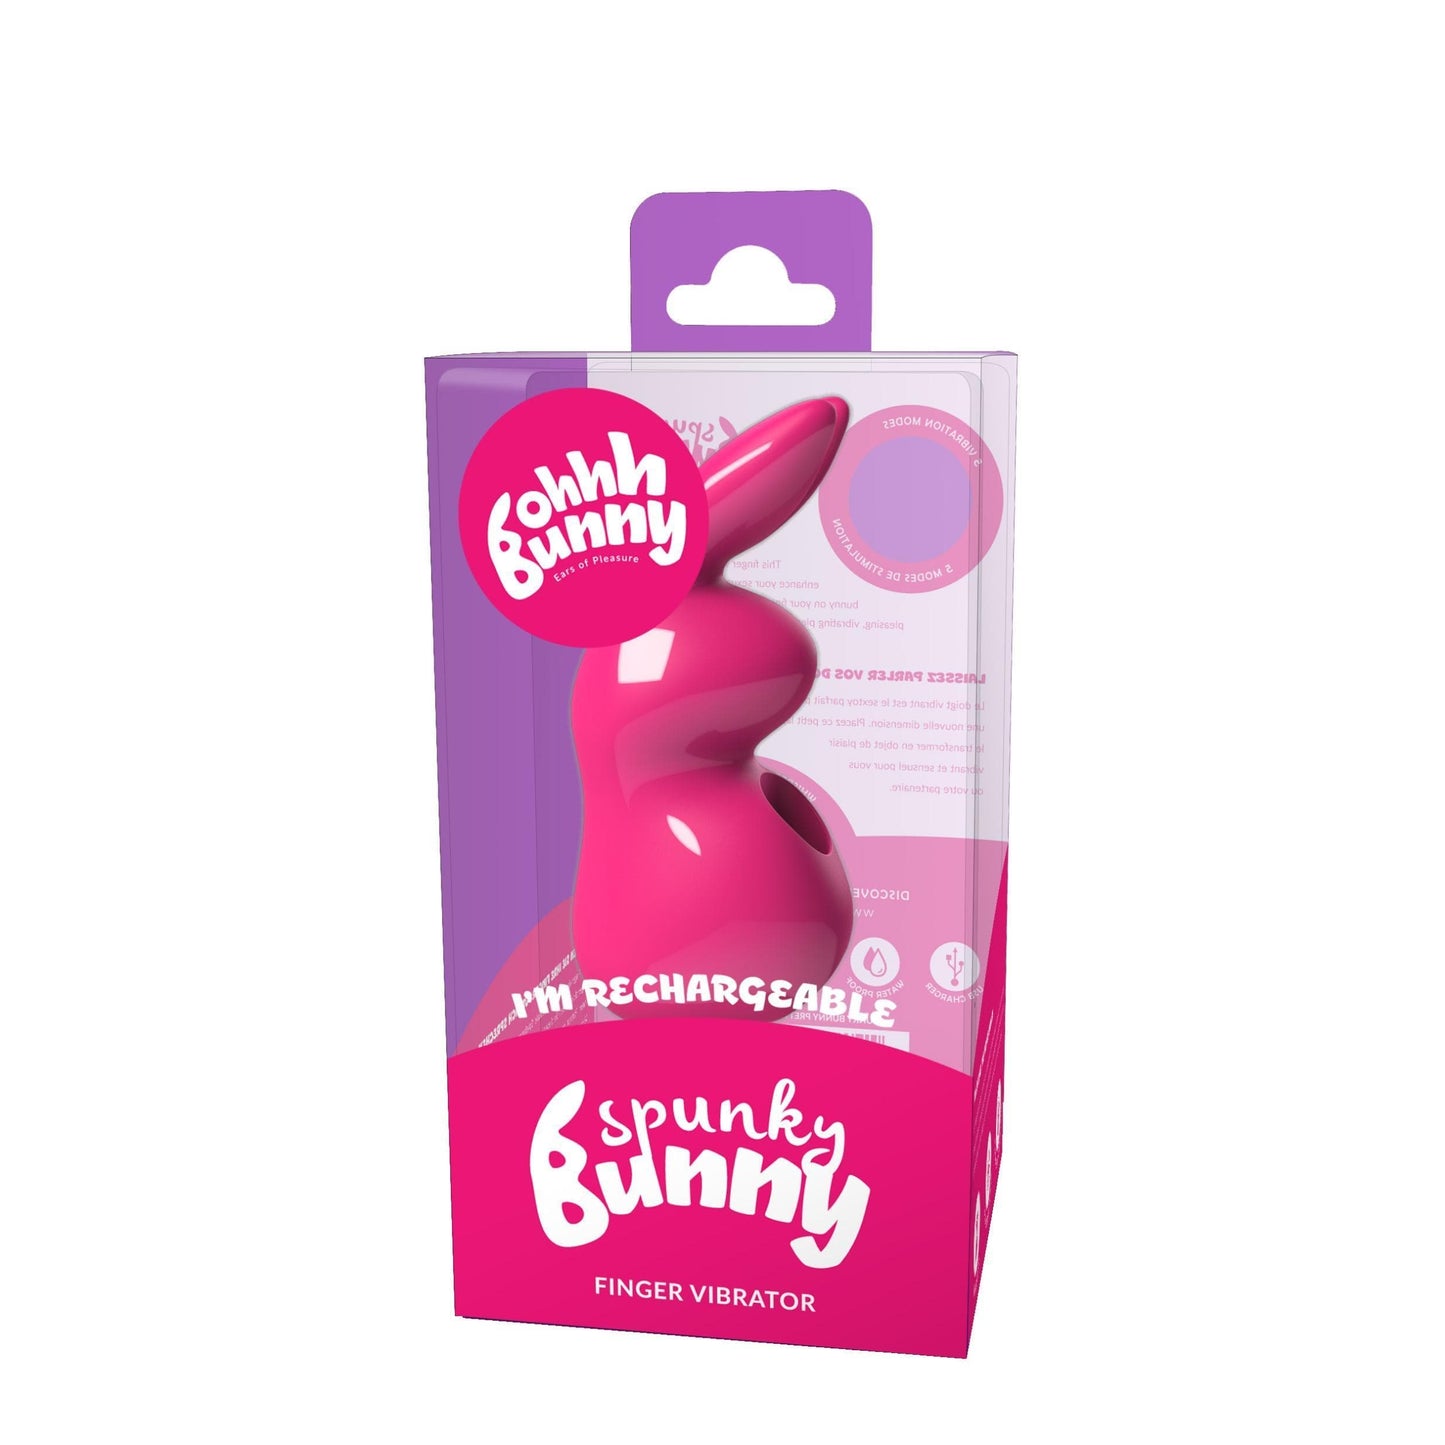 ohhh bunny spunky bunny finger vibrator pretty in pink